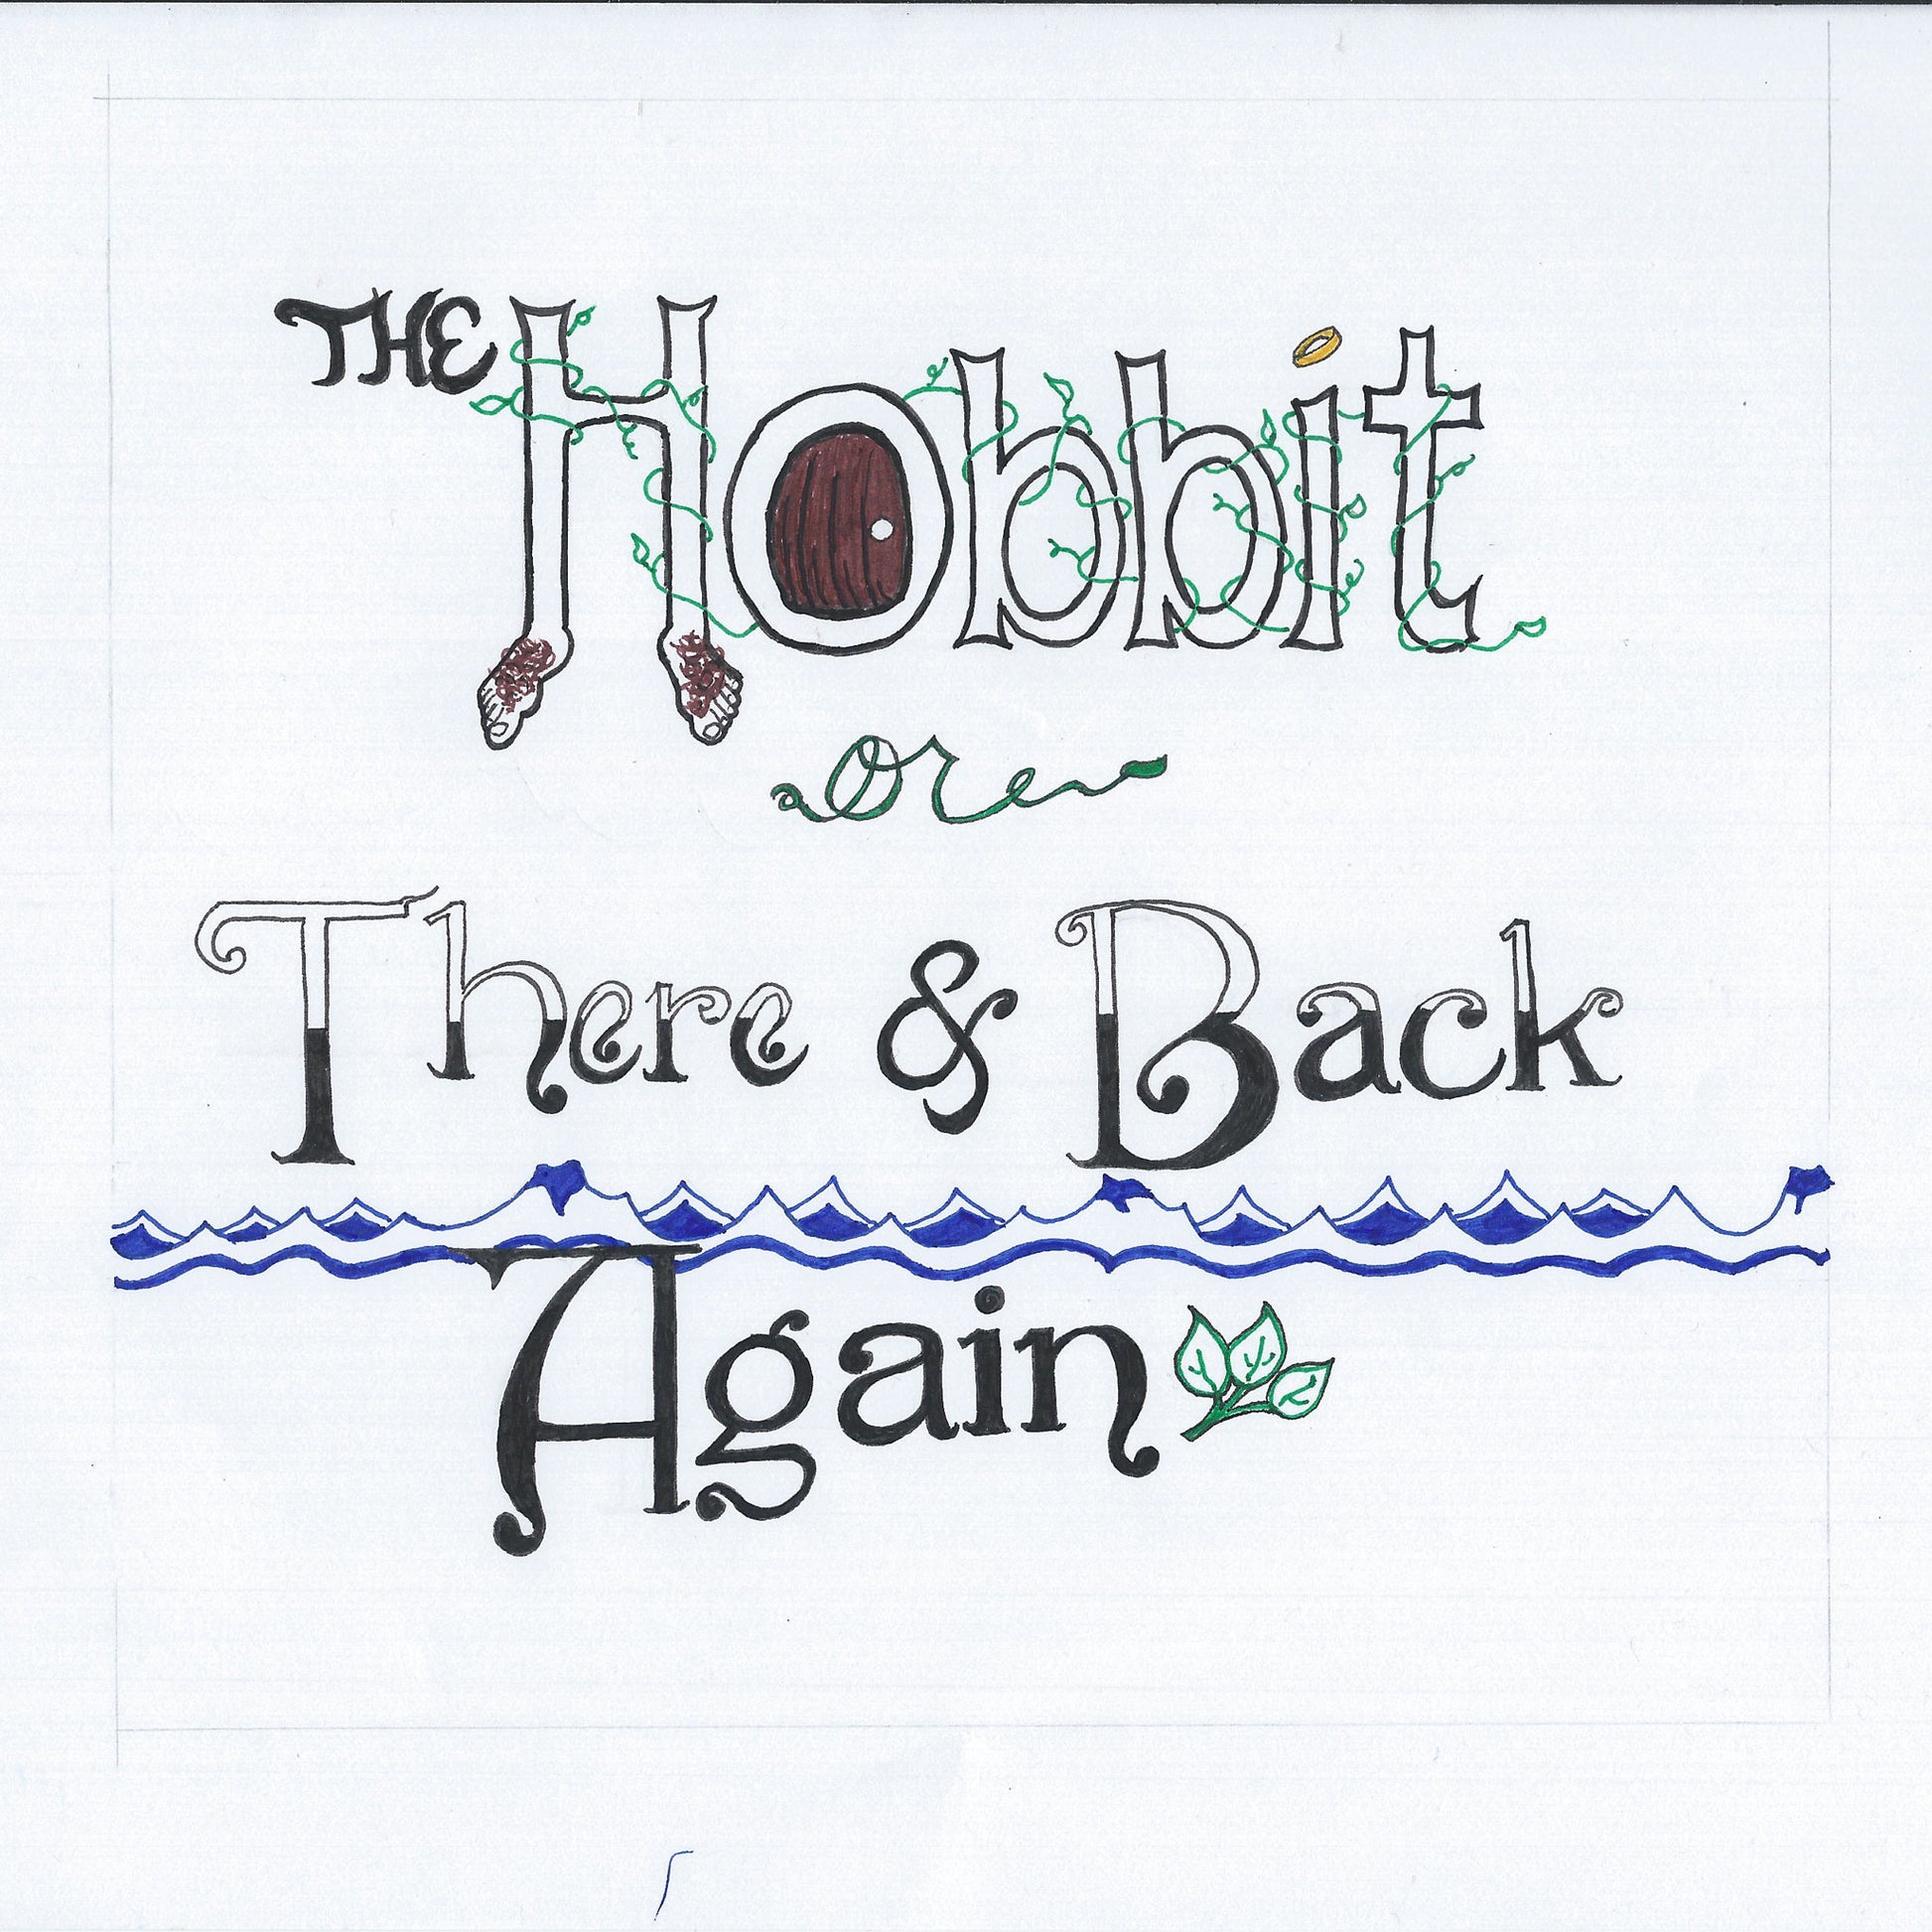 The Hobbit or There & Back Again, lettering